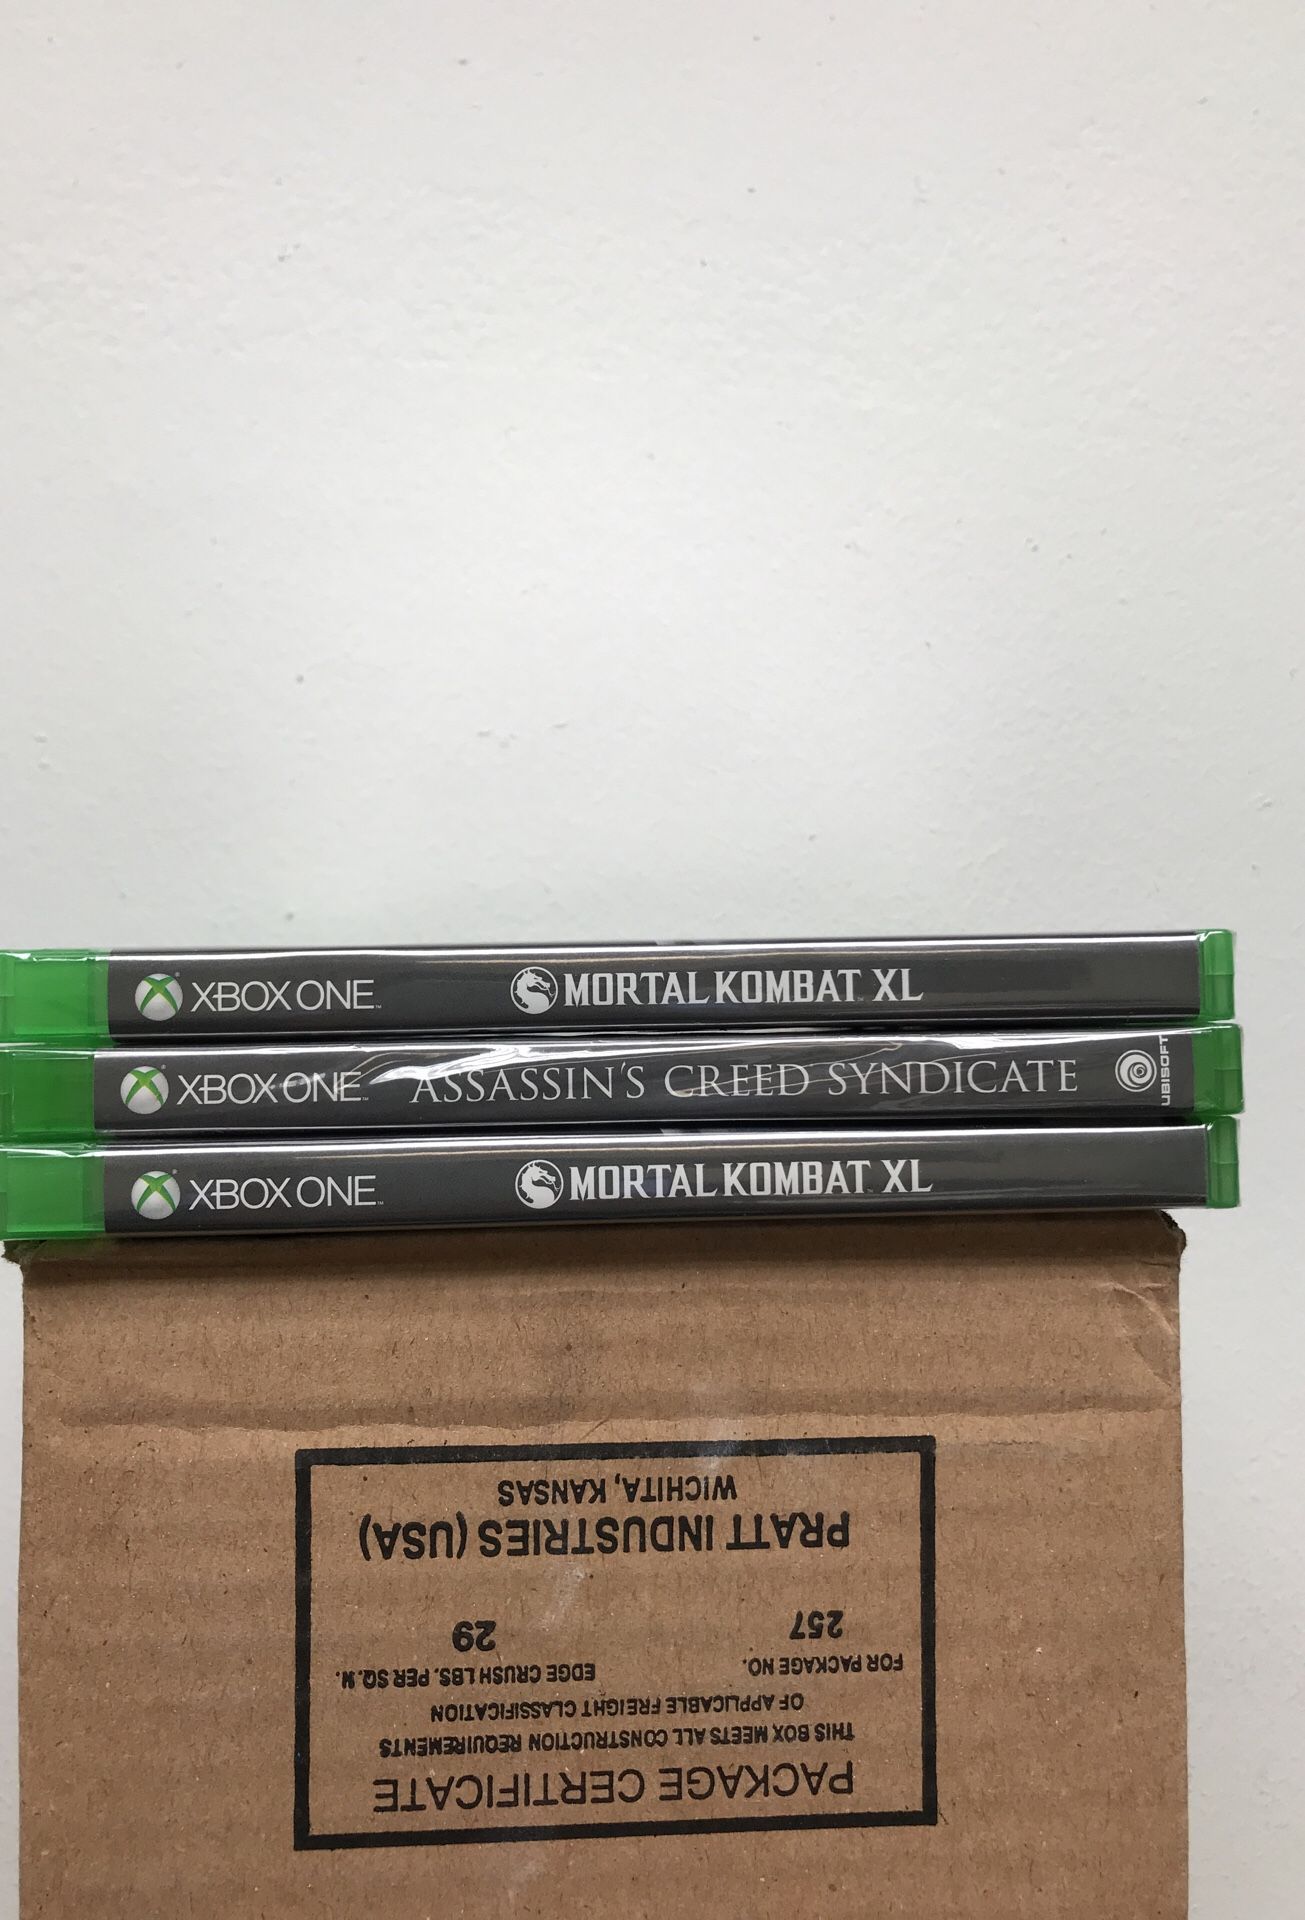 Xbox one games. Sealed from factory. Bundle or individual.